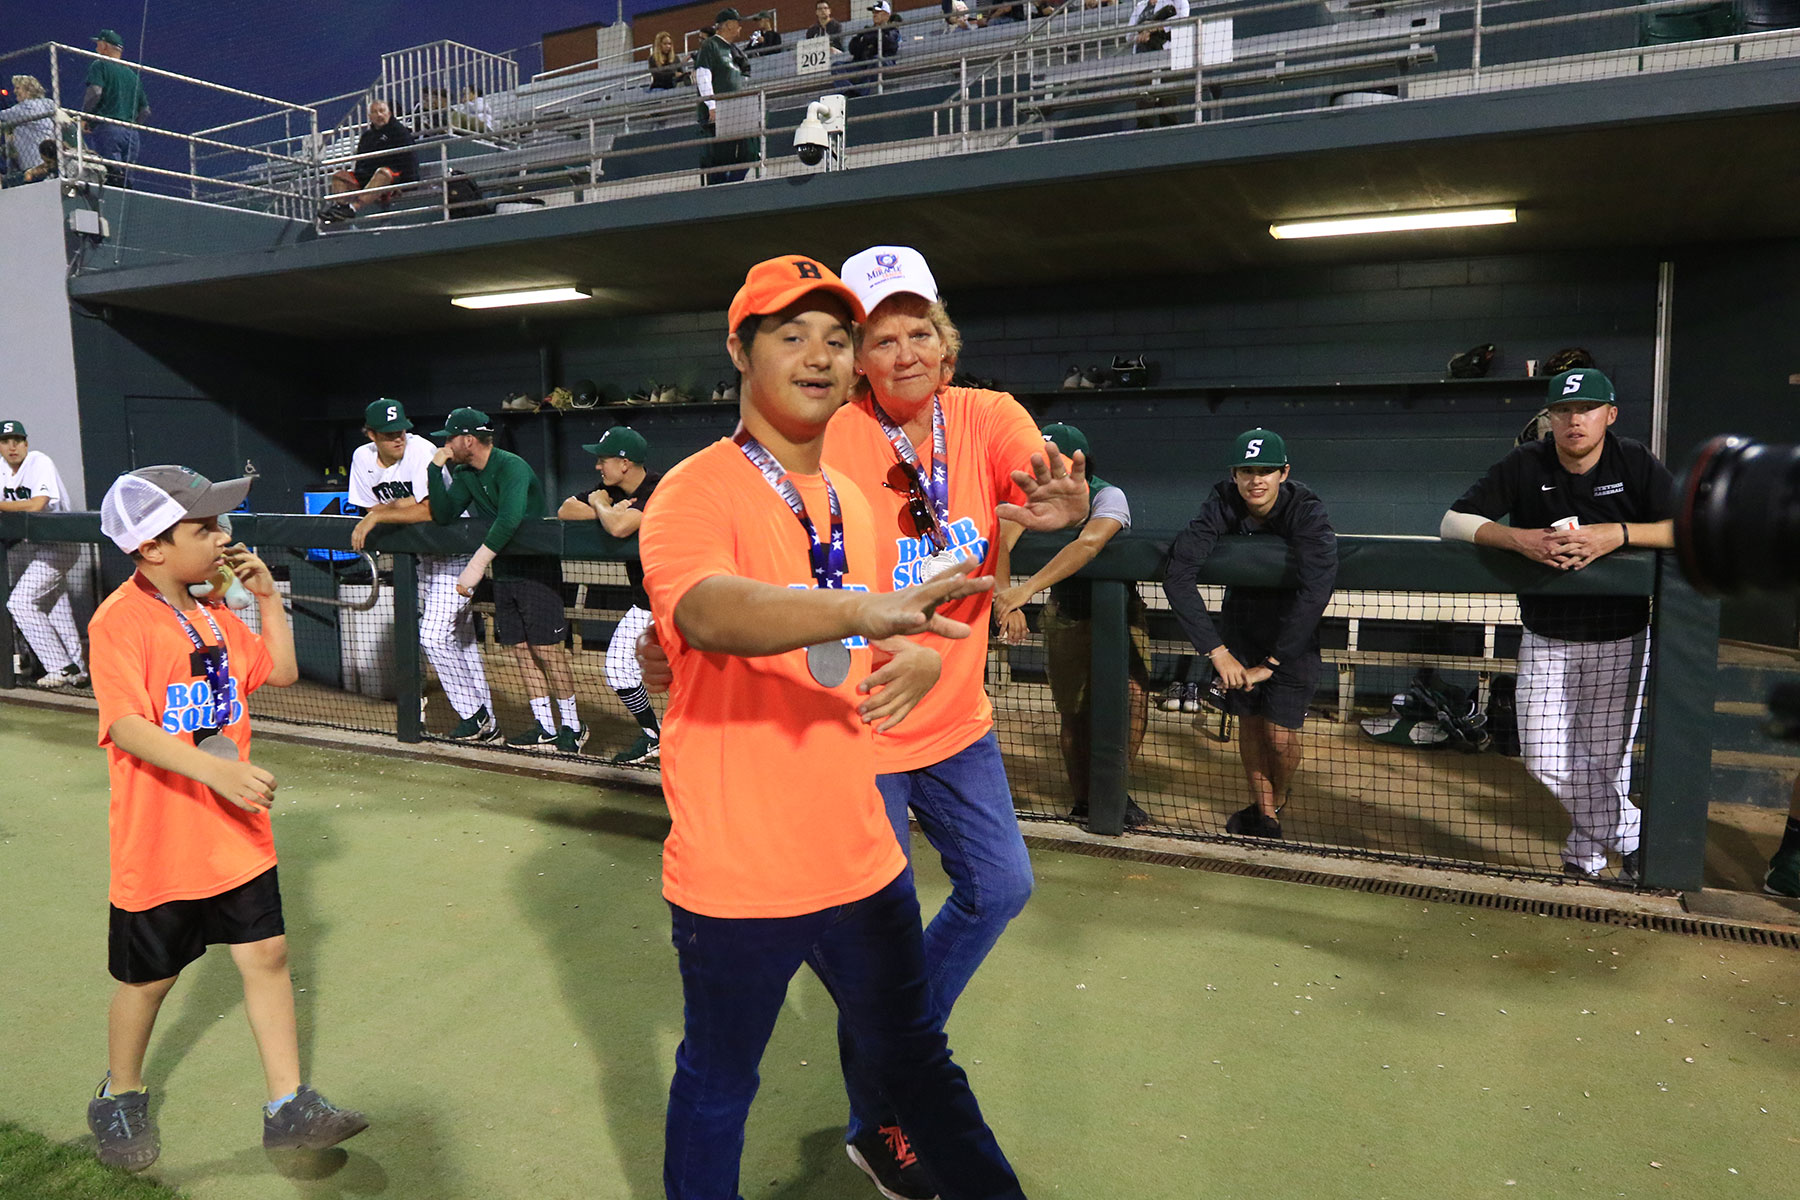 Photo of special riders at Baseball game